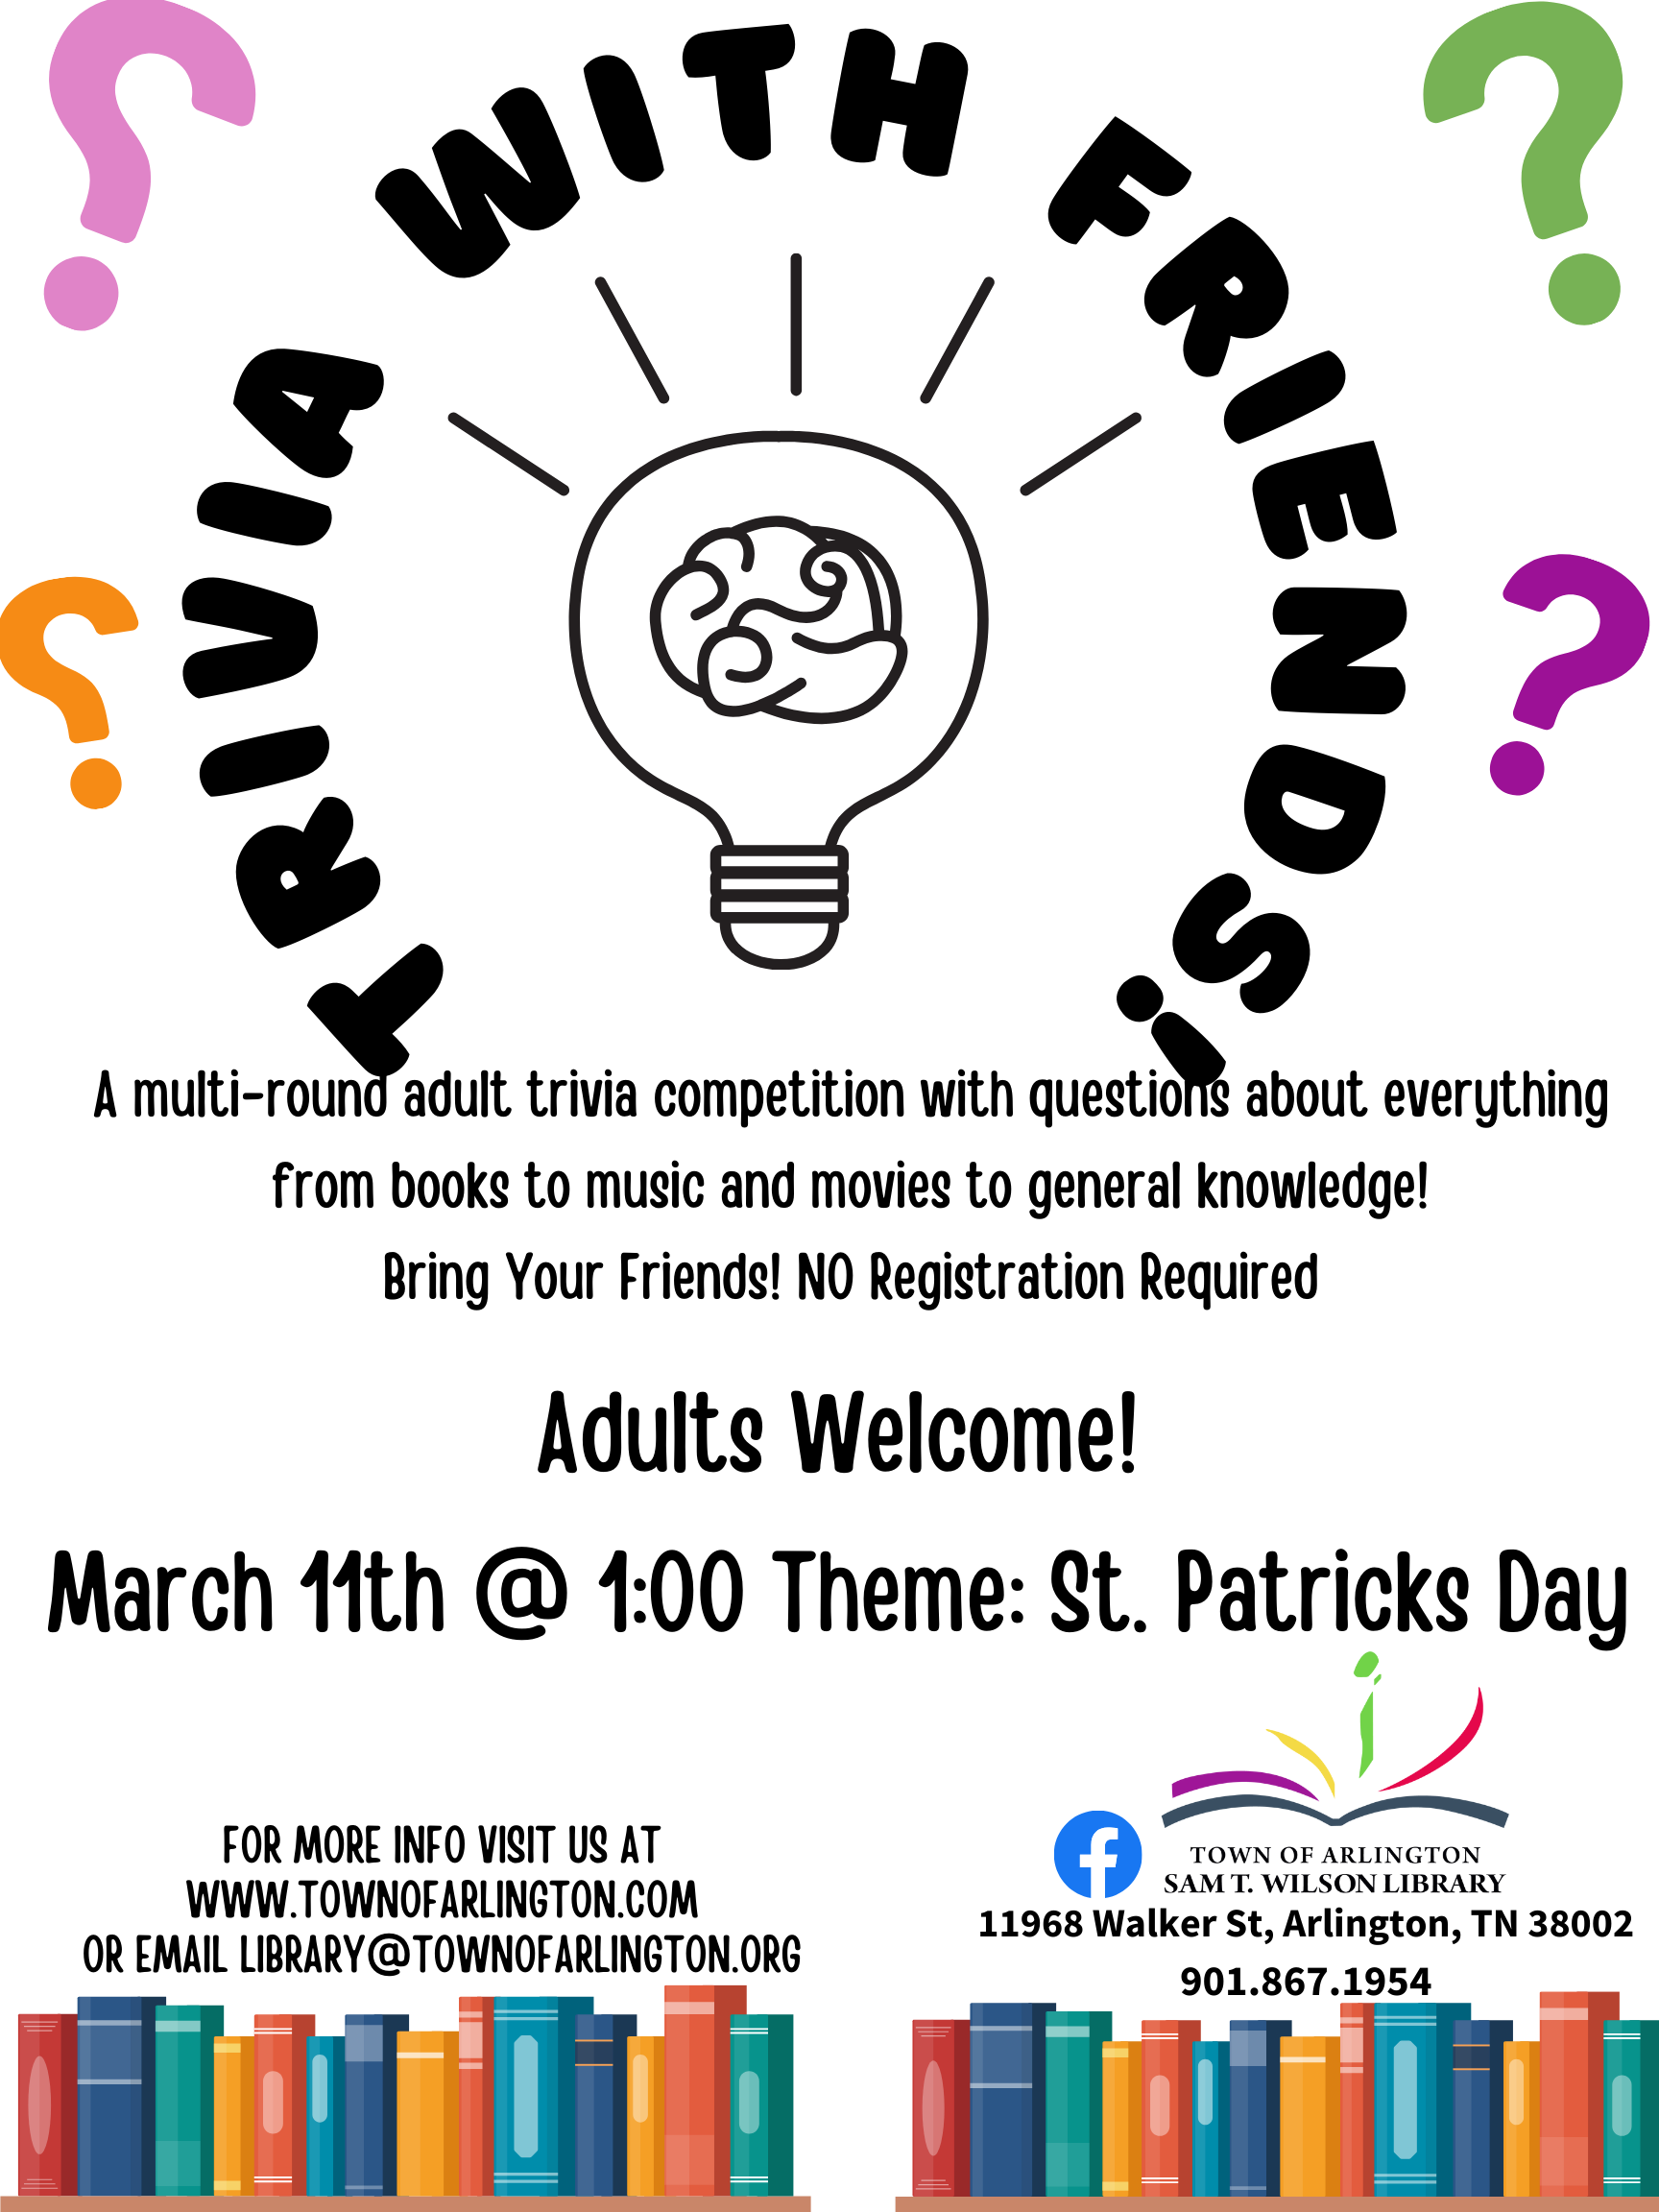 Trivia for all on March 11th at 1pm, with the theme of St. Patrick's Day